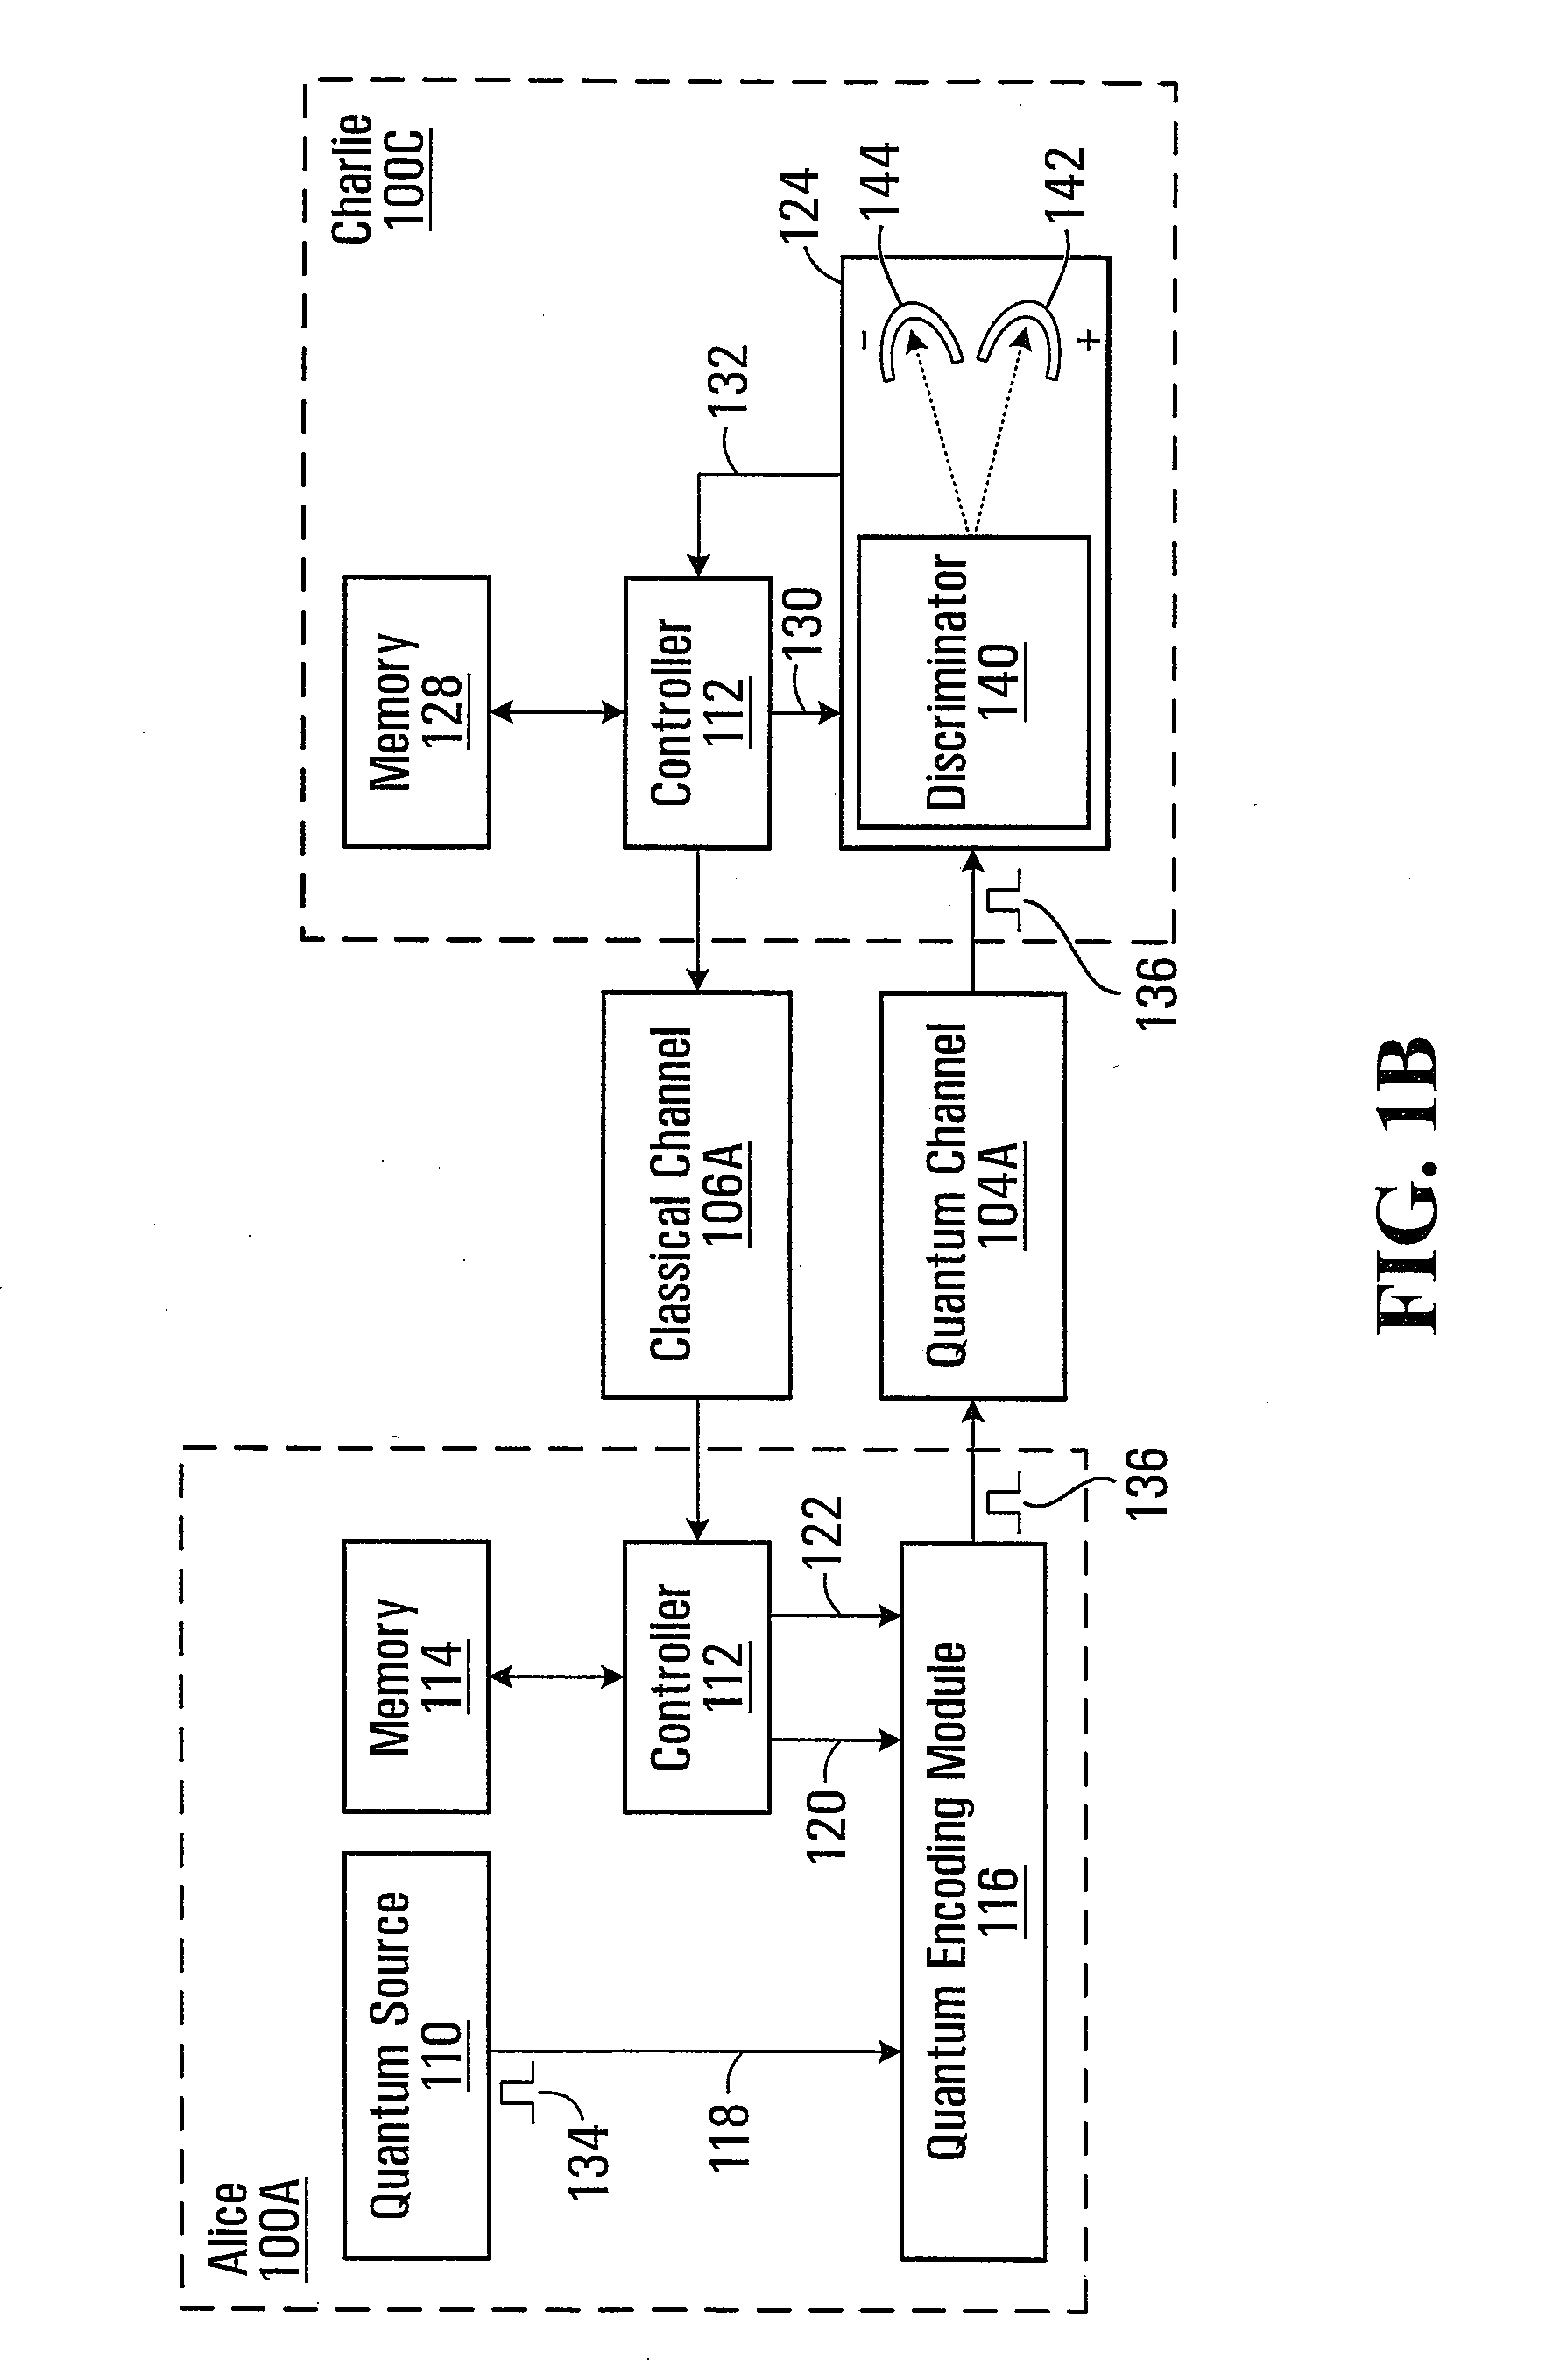 Methods and systems for communicating over a quantum channel